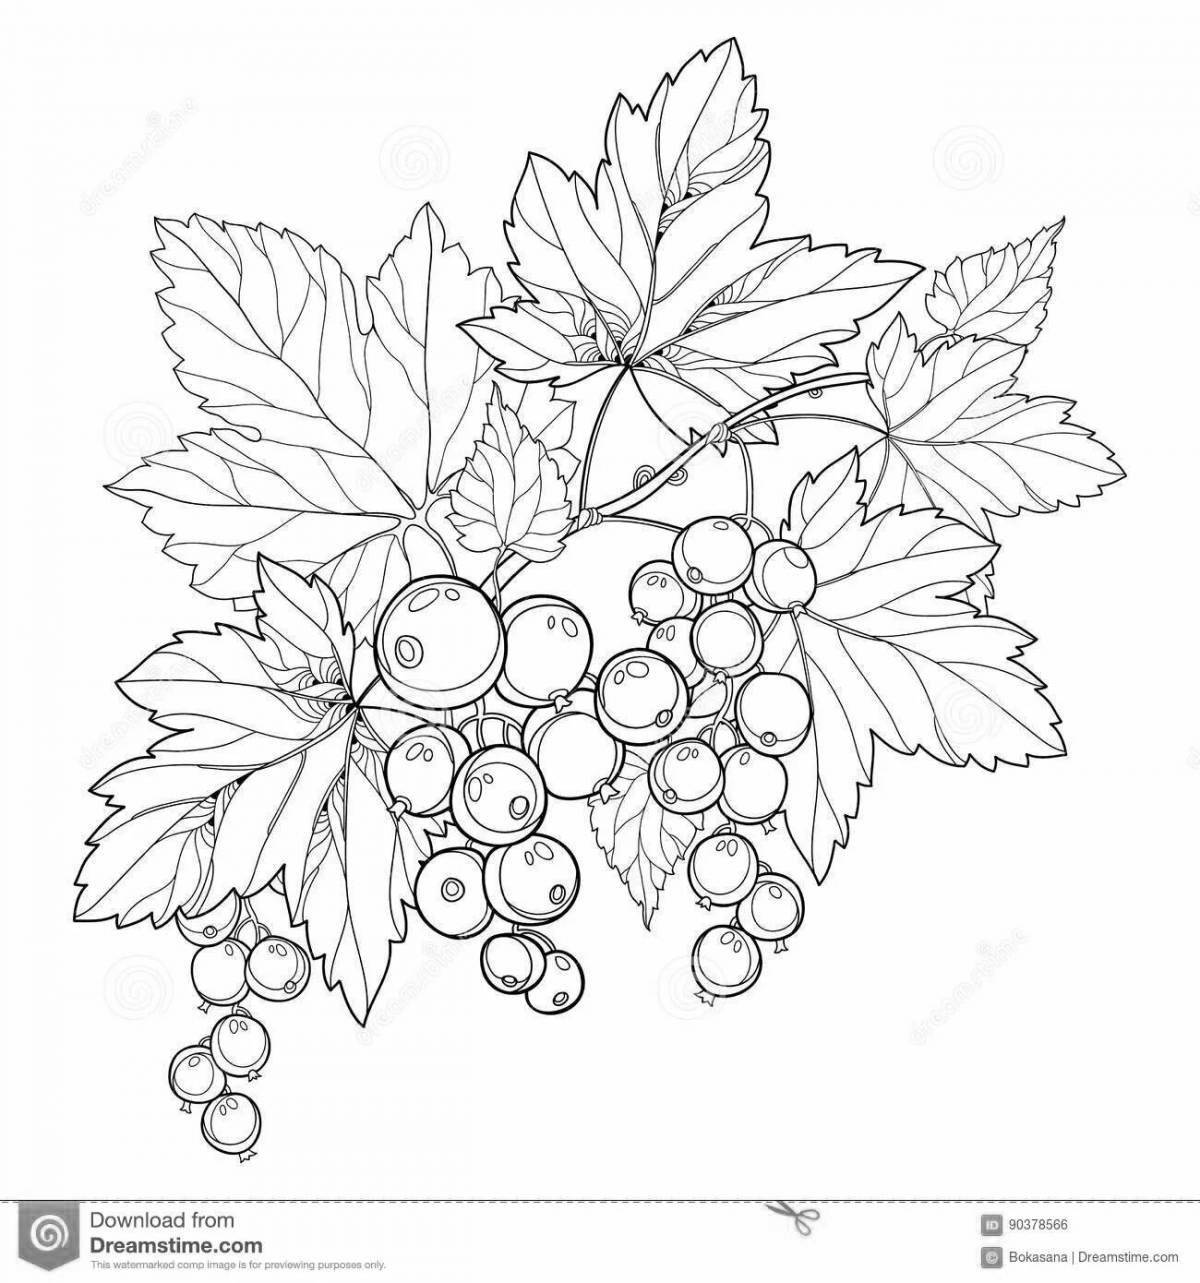 Merry currant coloring for children